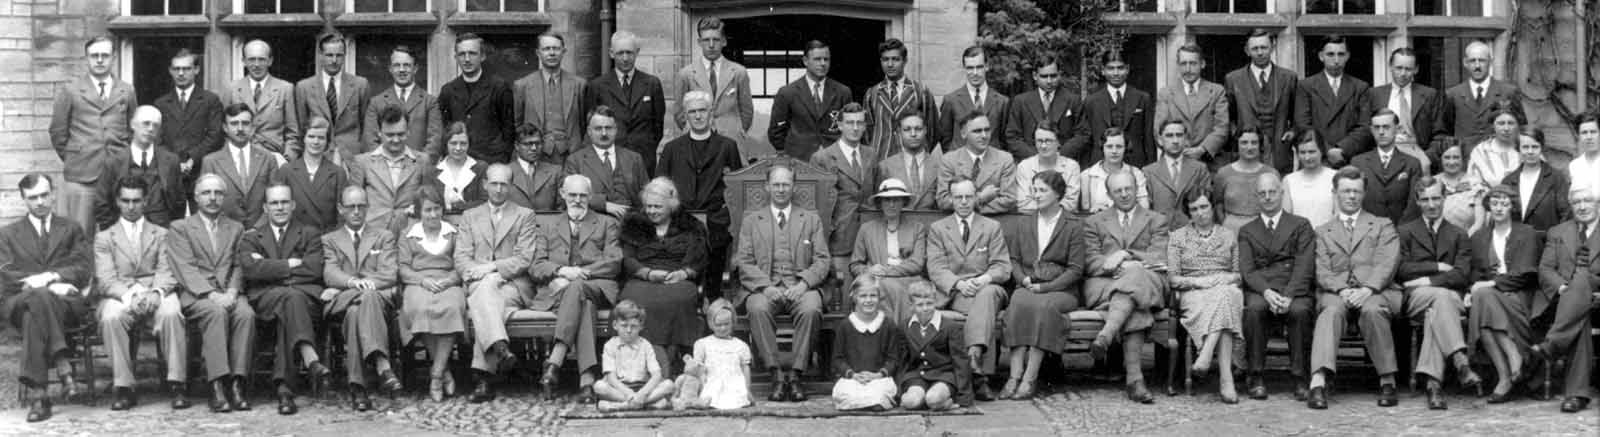 Georgeson (far right, second row) at the Edinburgh Mathematical Colloquium in St Andrews in 1934. Image courtesy of the University of St Andrews MacTutor History of Mathematics 